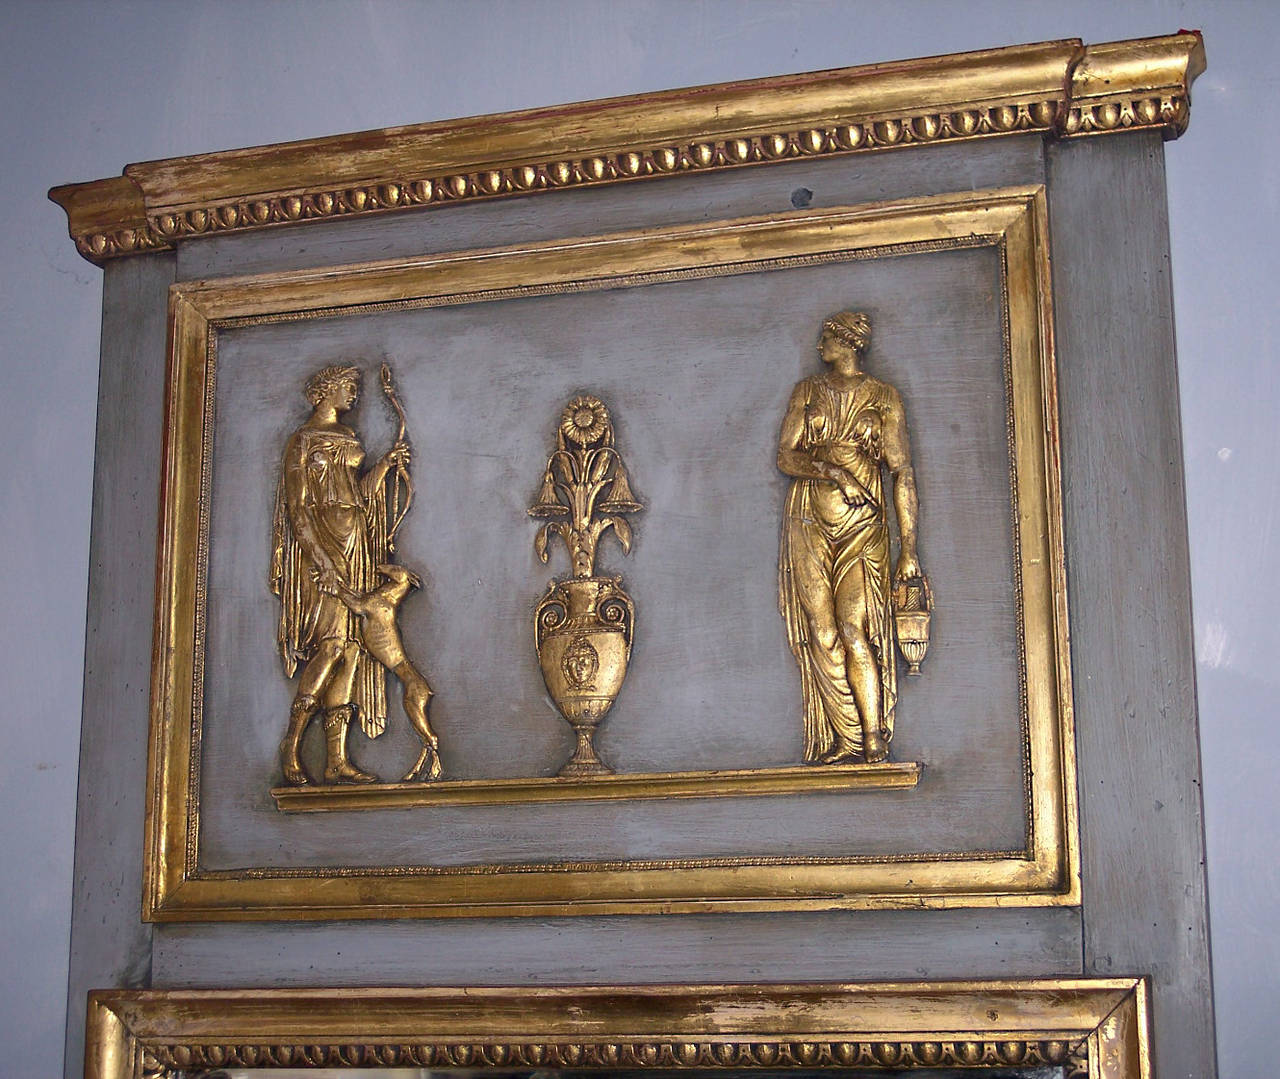 A 19th century French trumeau mirror. Gilded and patinated, richly decorated with Classical Greek carved figurative reliefs.